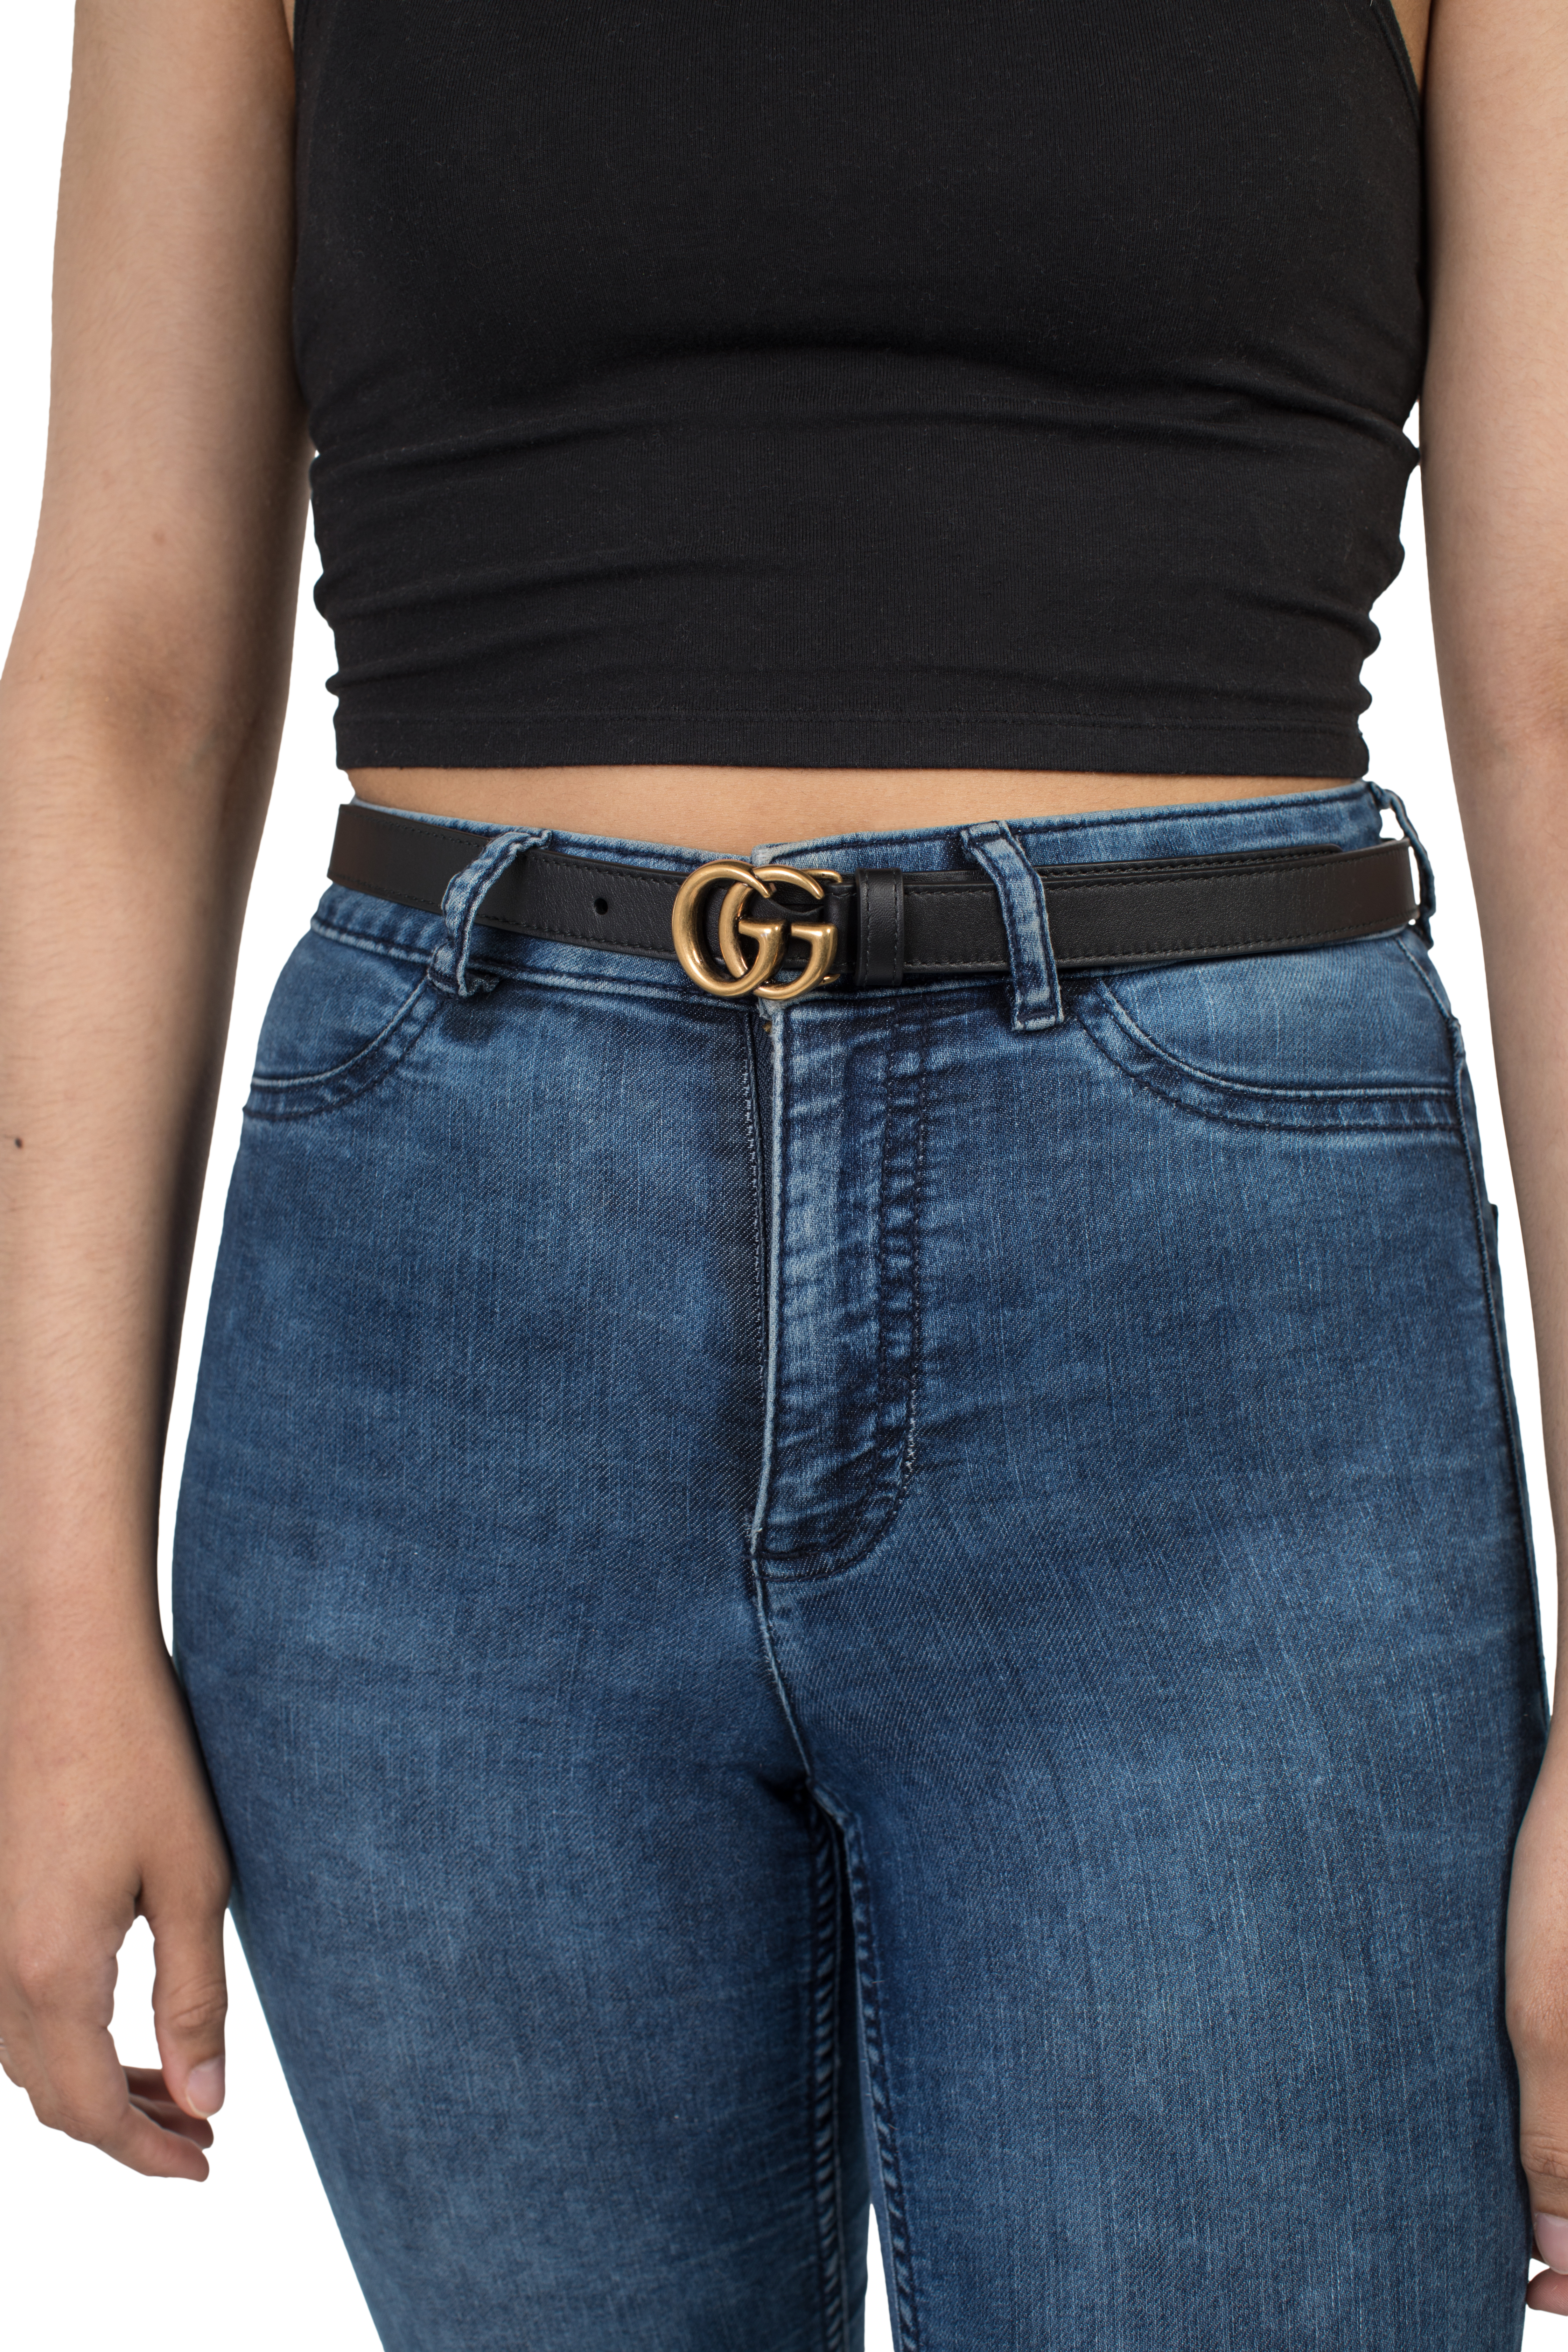 gucci leather double g belt